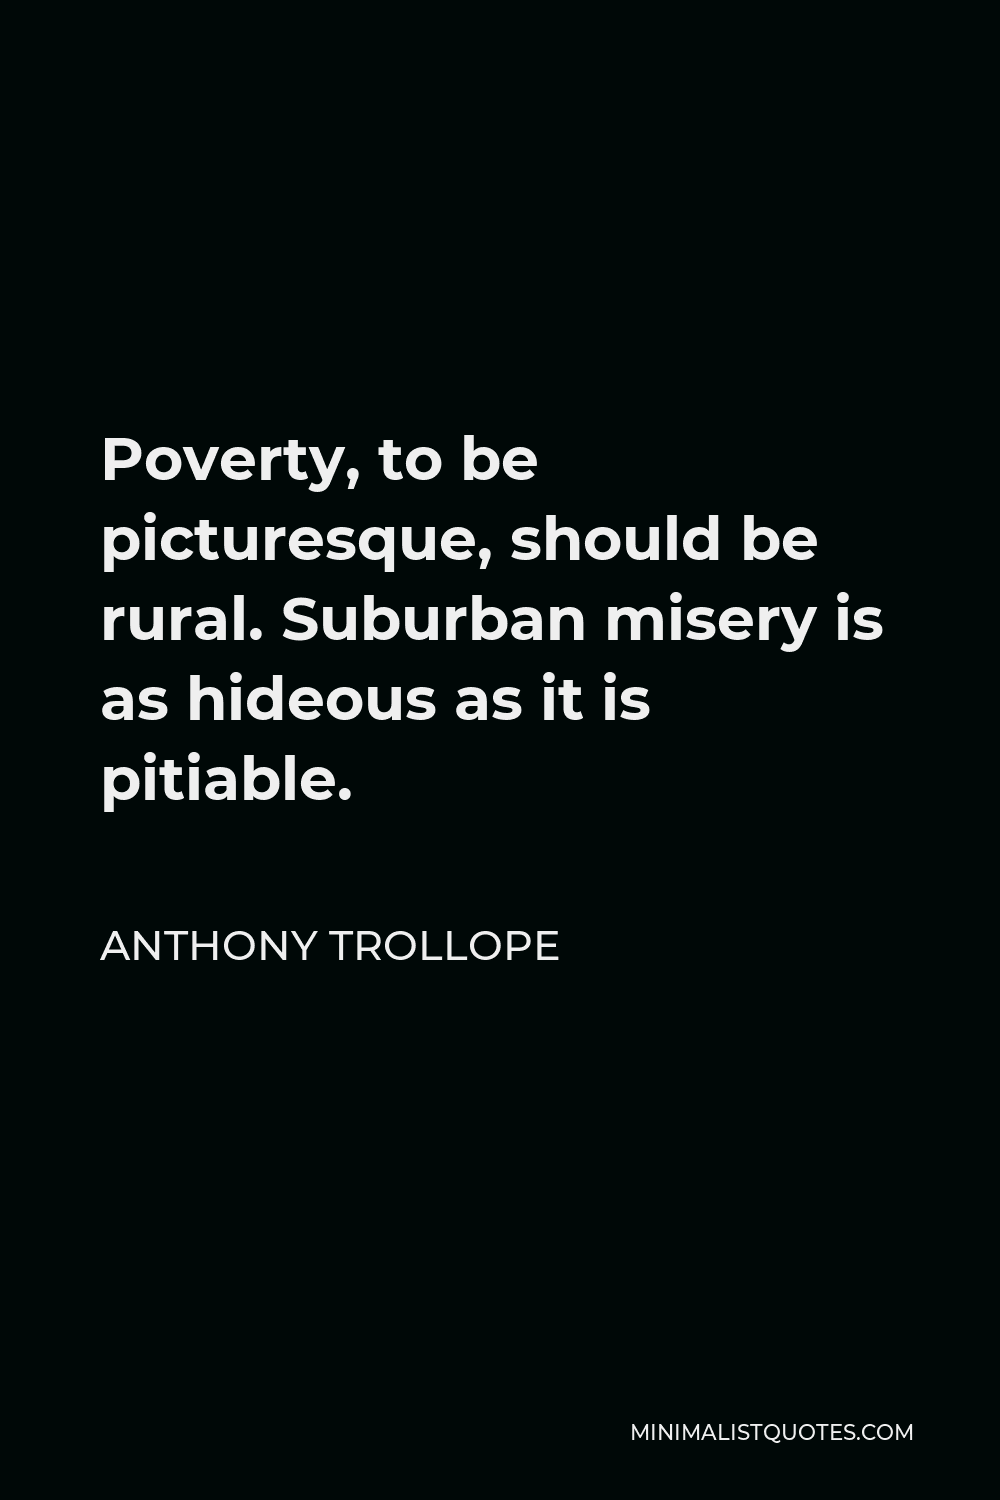 Anthony Trollope Quote - Poverty, to be picturesque, should be rural. Suburban misery is as hideous as it is pitiable.